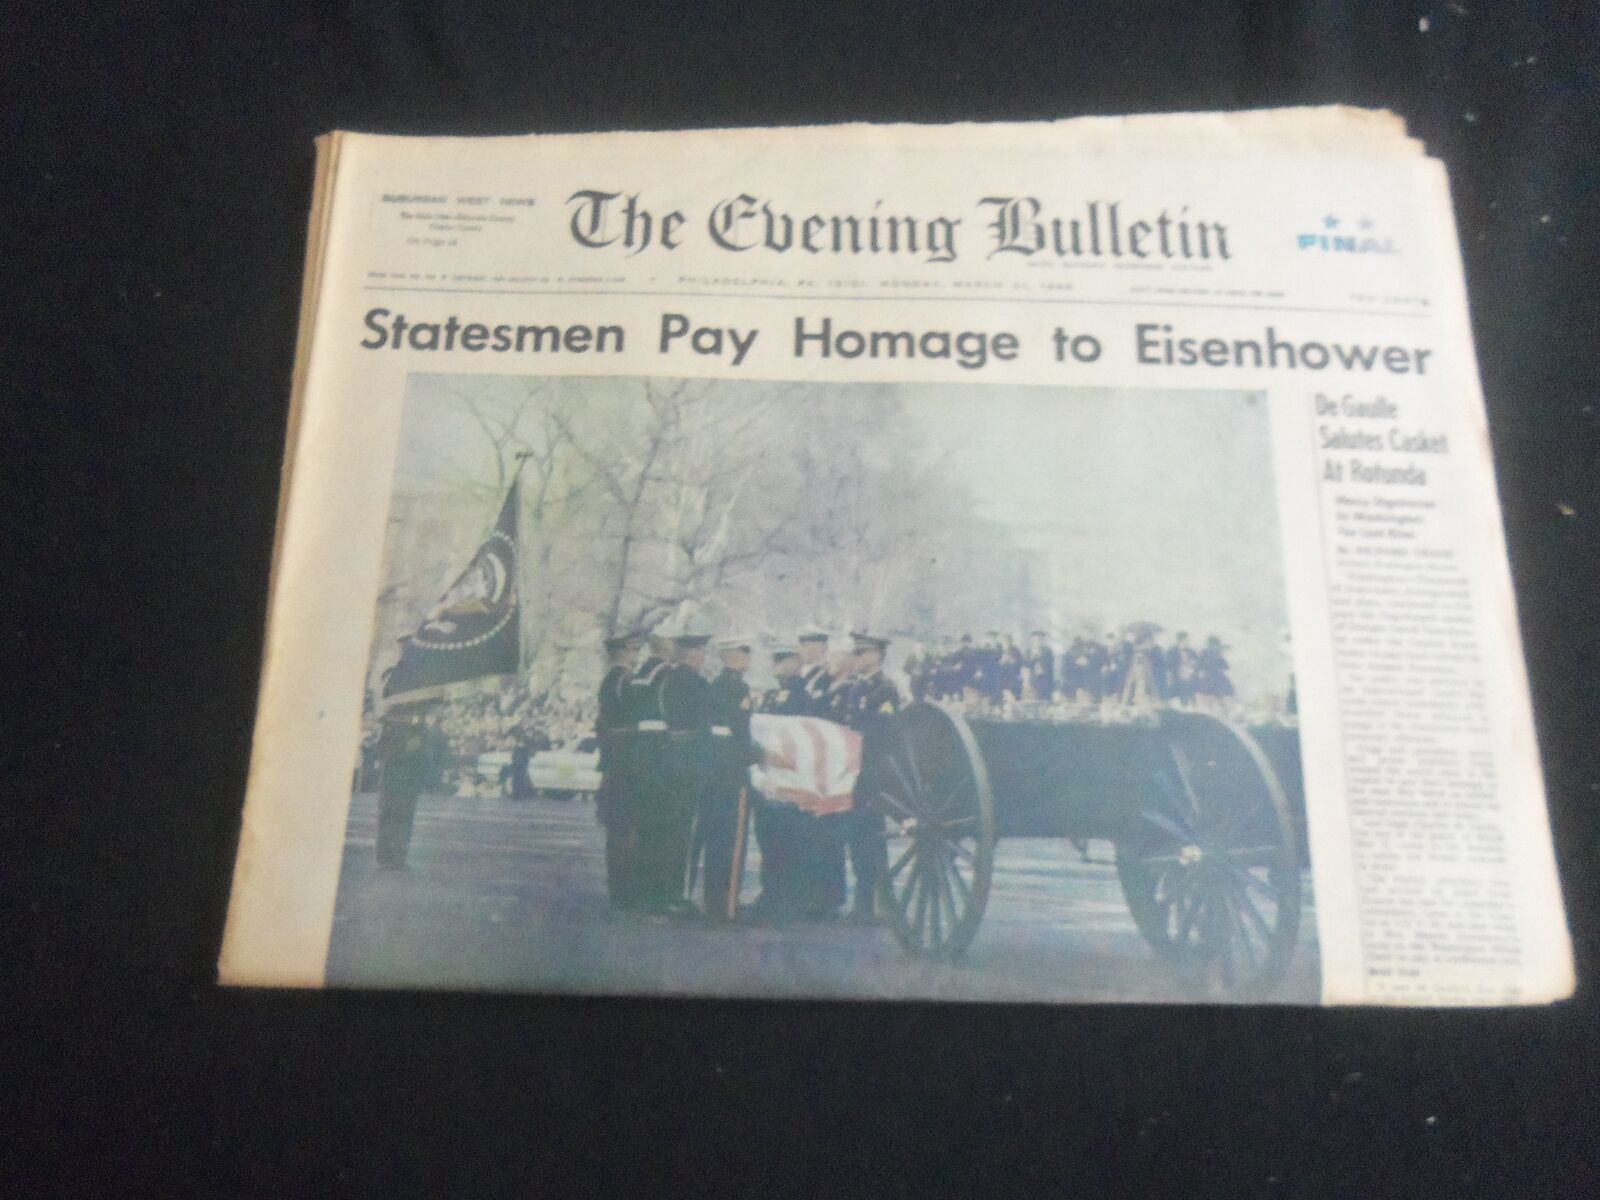 1969 MARCH 31 THE EVENING BULLETIN NEWSPAPER - HOMEAGE TO EISENHOWER - NP 5780